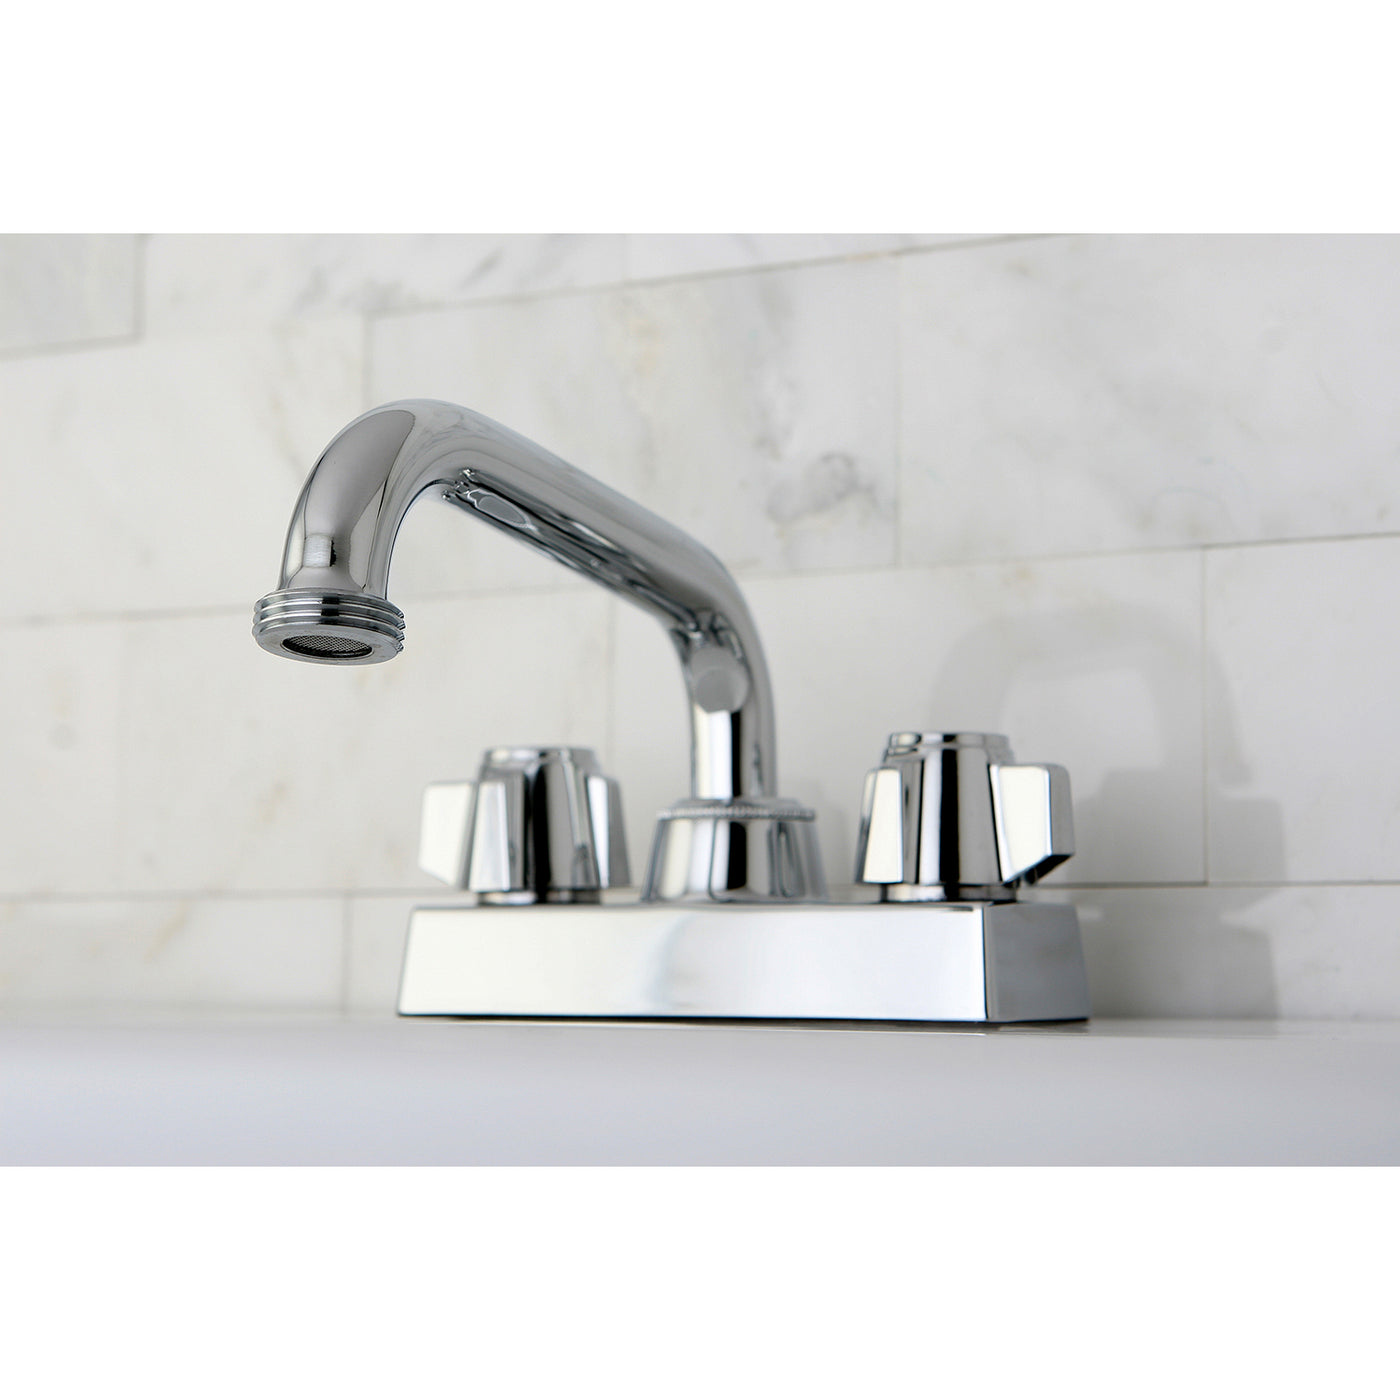 Elements of Design EB471 Two-Handle Laundry Faucet, Polished Chrome